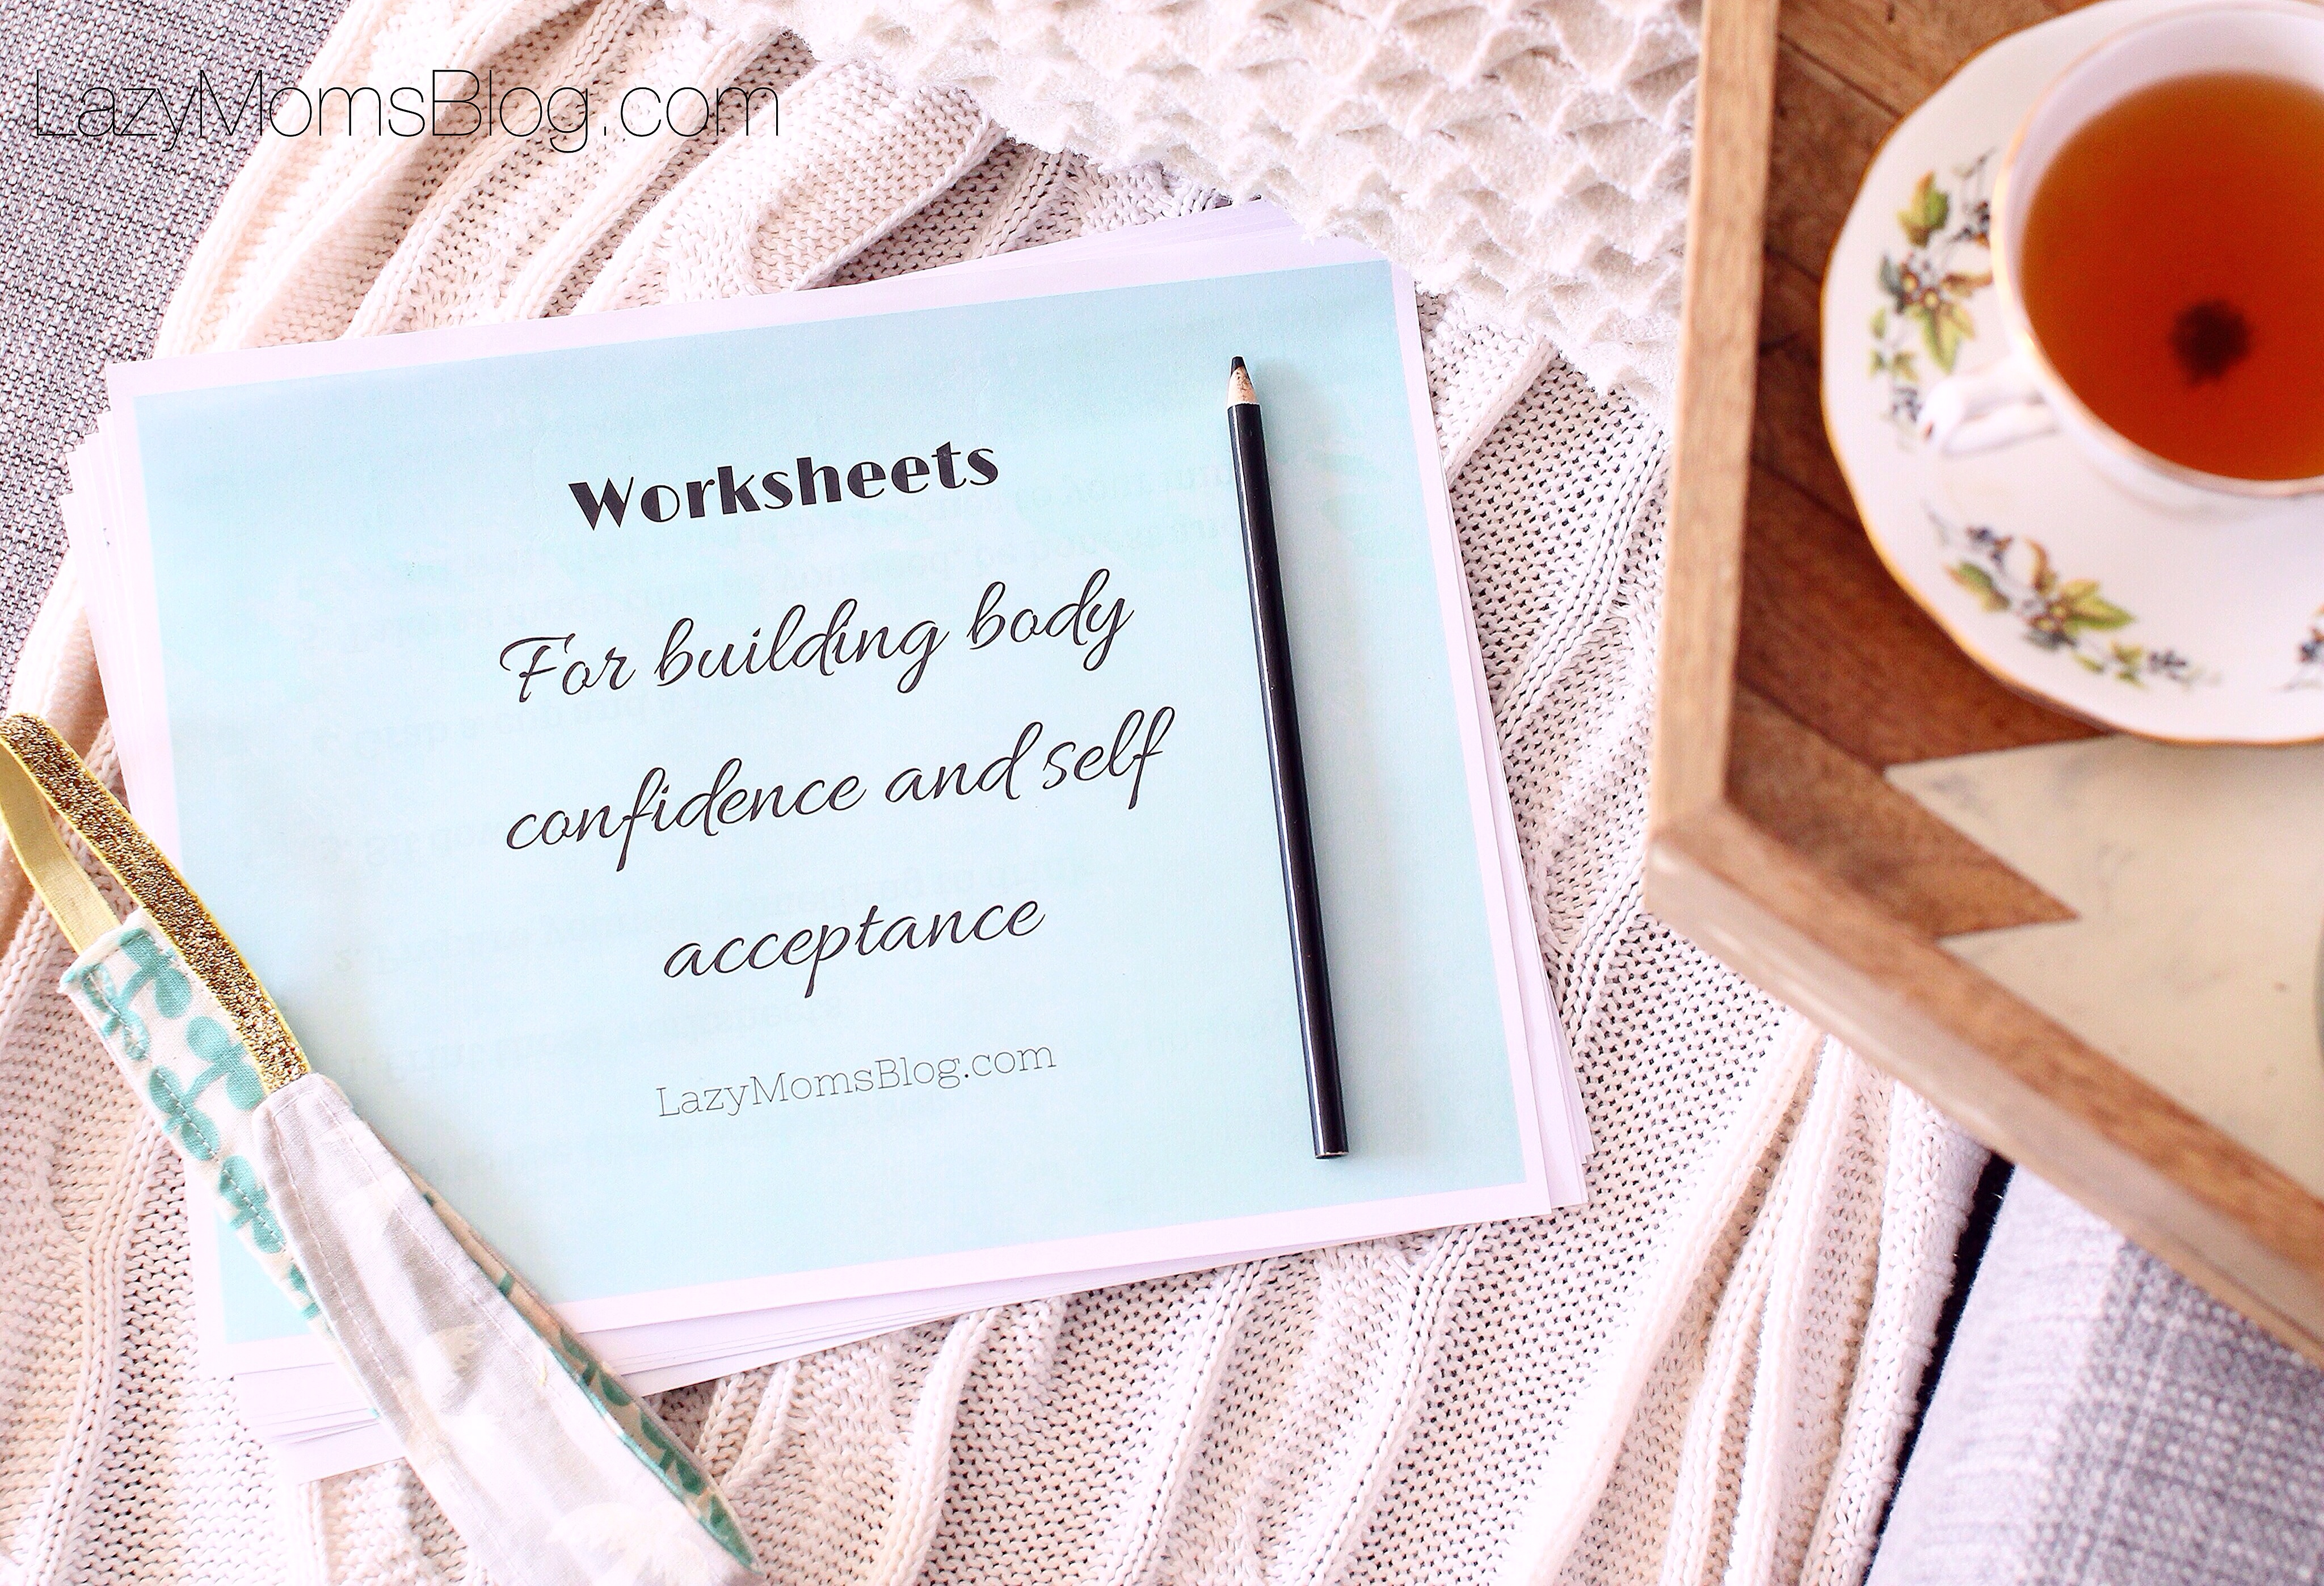 Worksheets for building body confidence and self acceptance